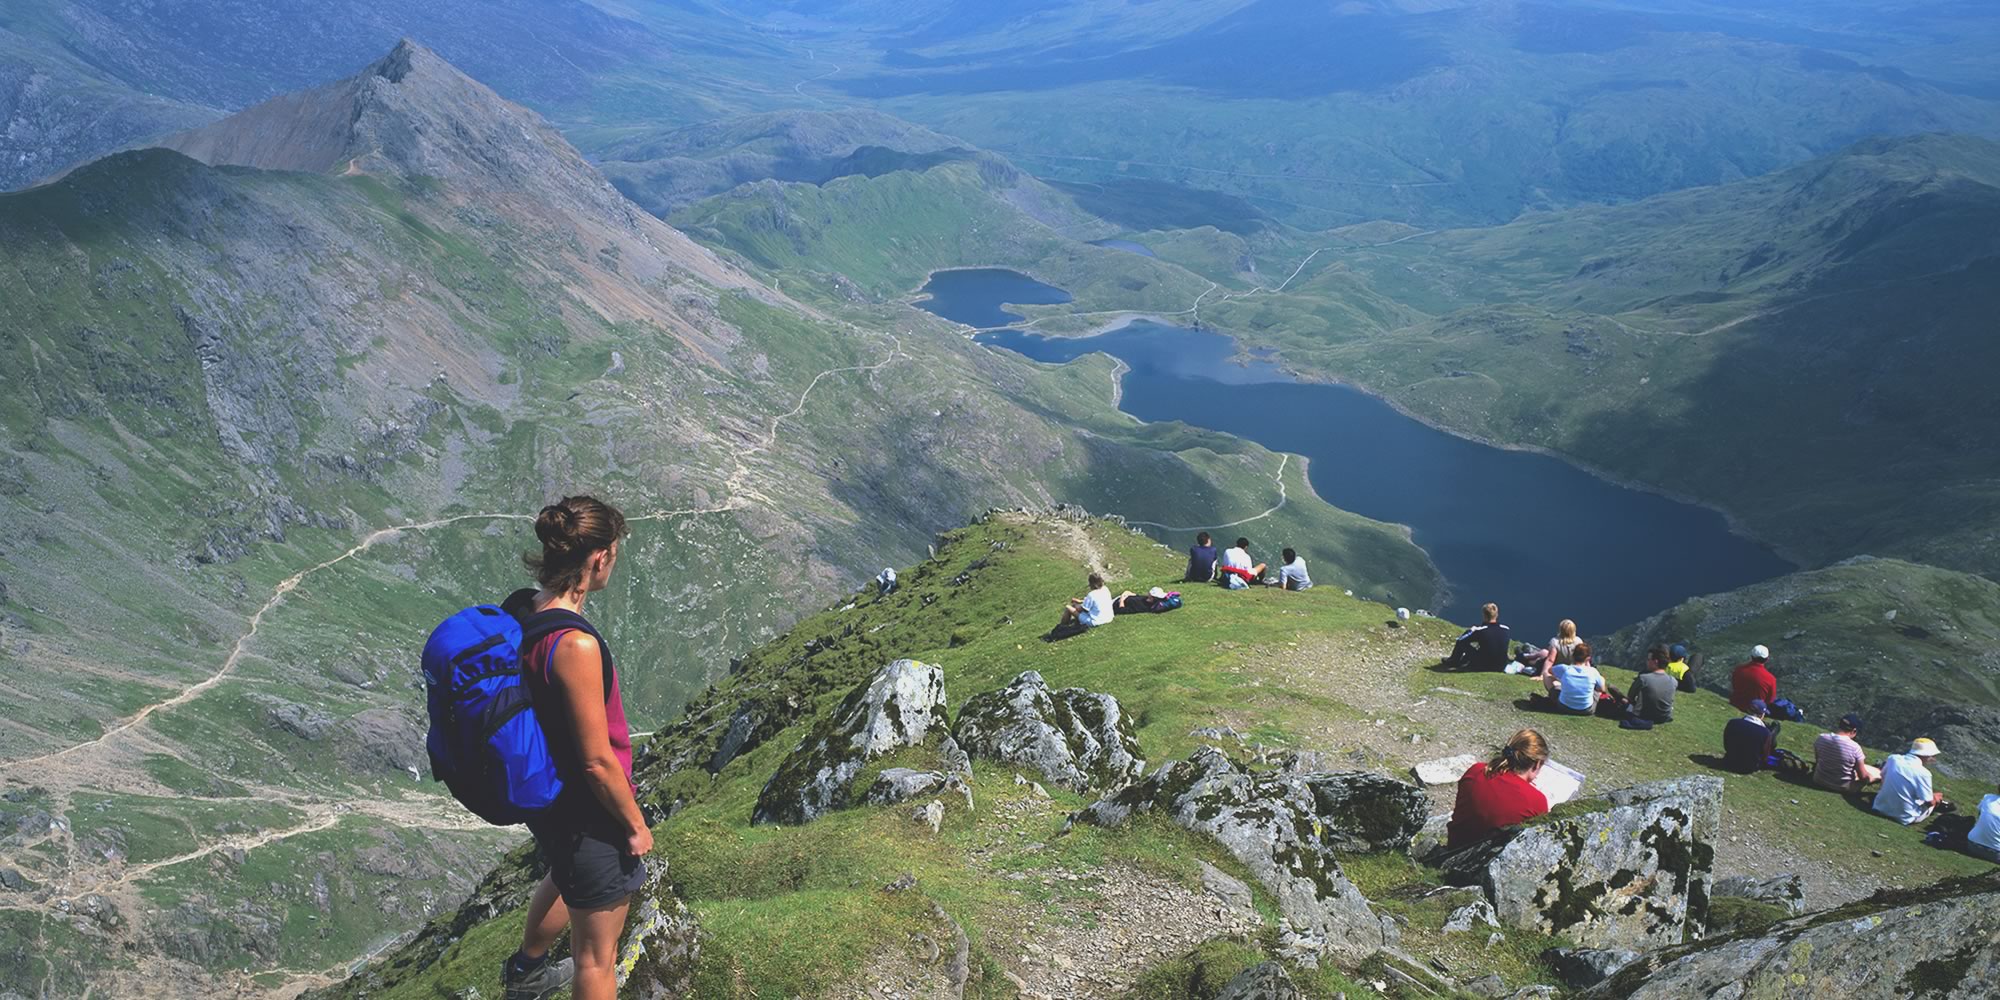 Walkers enjoying a view over tarns and a glacial valley below